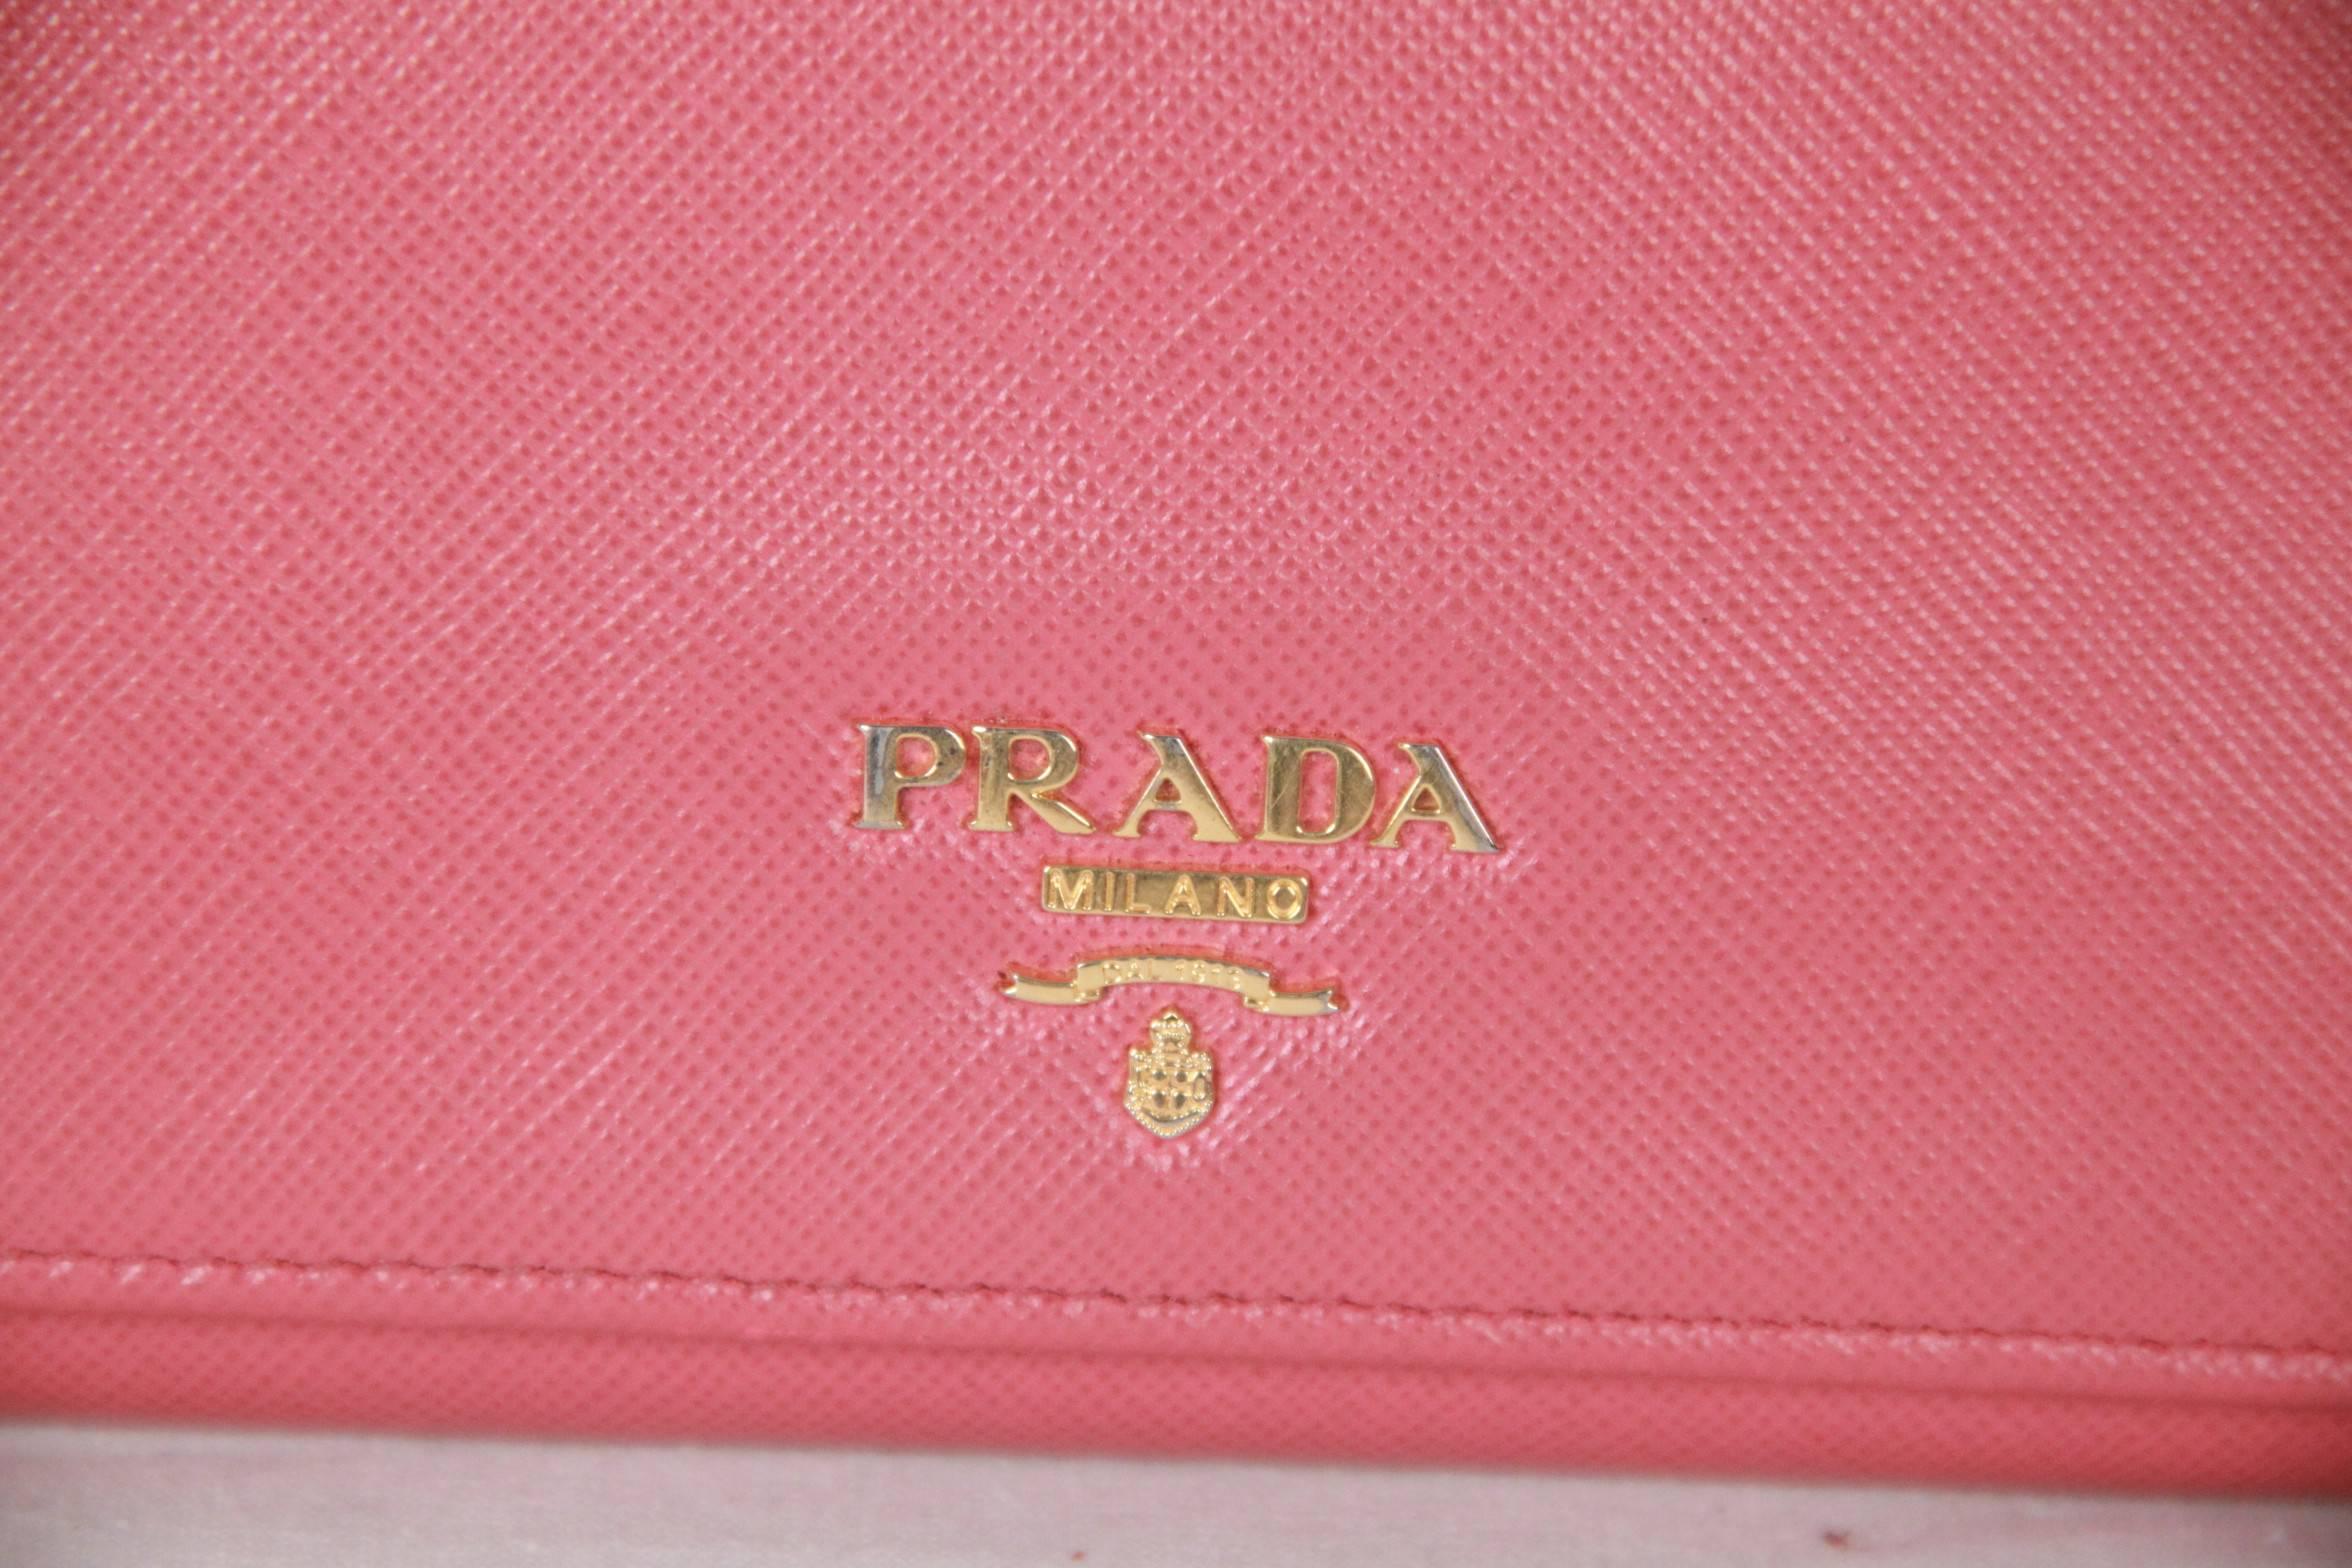 - Leather flap wallet in pink color by PRADA
- Saffiano Leather
- Mod. 1M1132
- Gold-plated hardware
- Metal lettering logo
- Snap closure
- 10 credit card slots
- One coin compartment with zipper closure
- 2 bill compartments and 4 open pockets
-